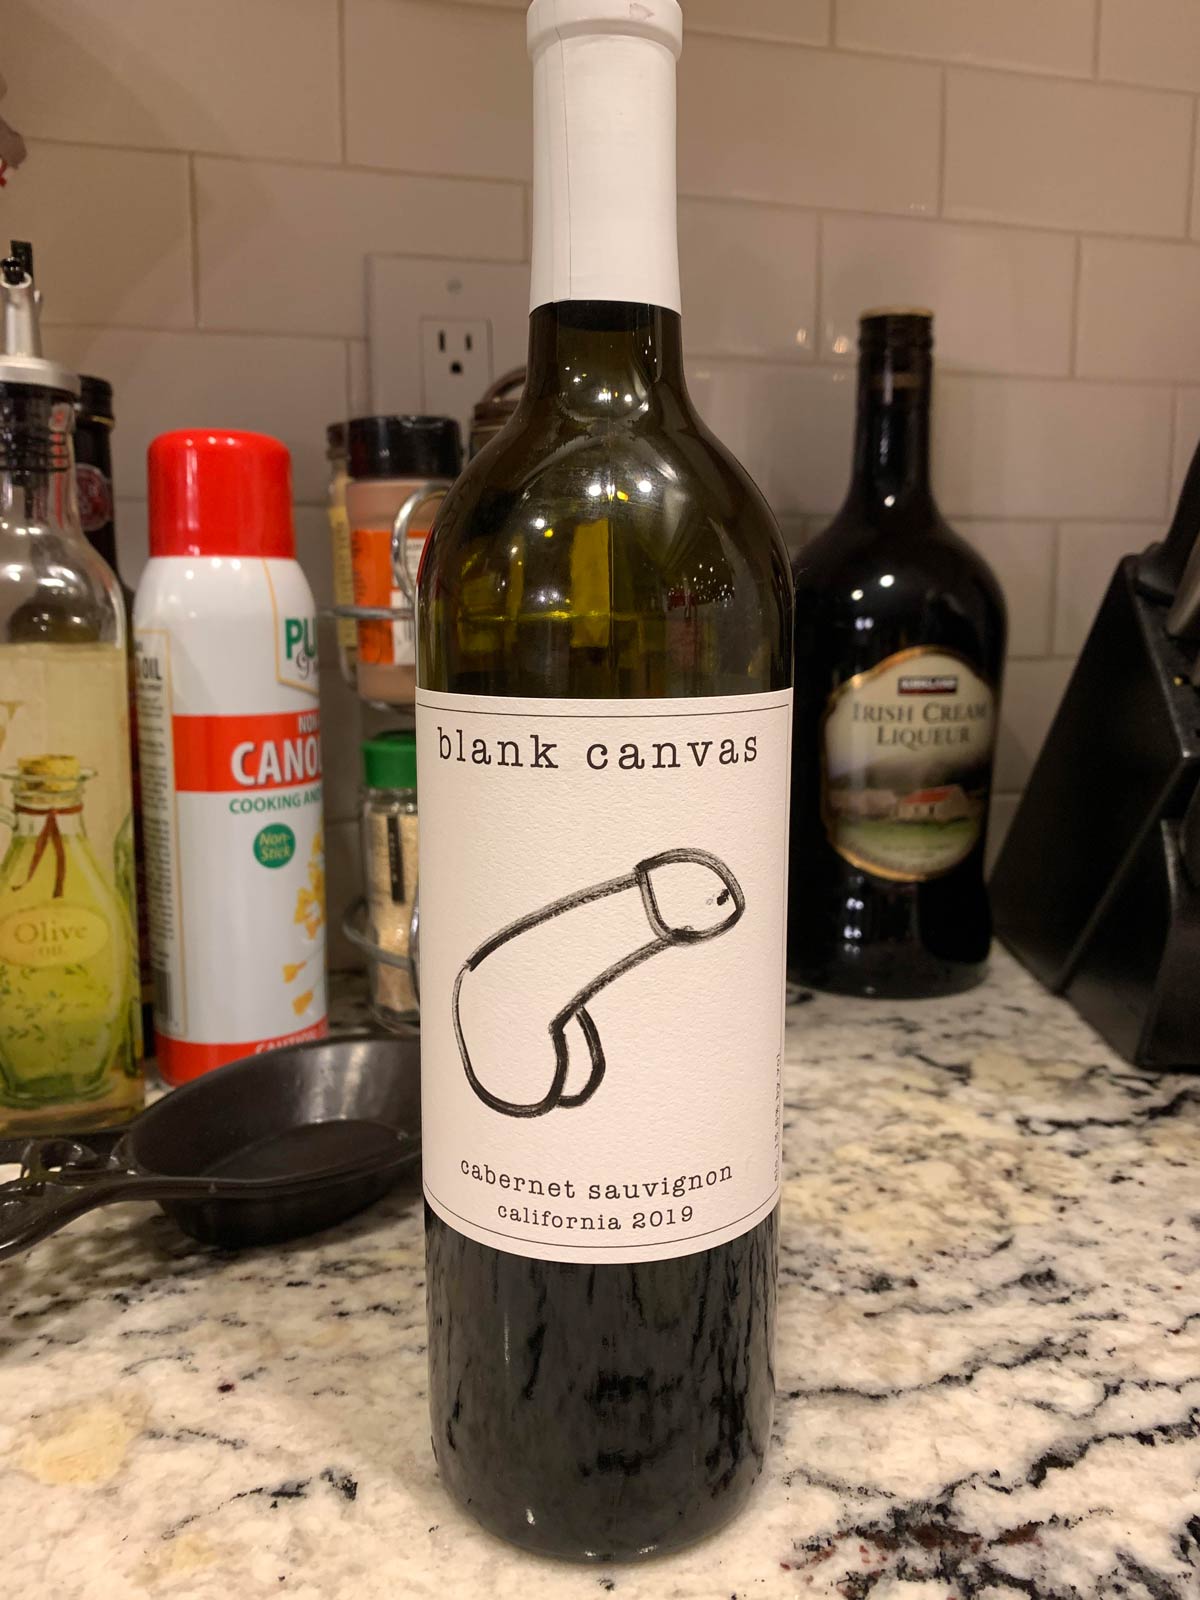  My wife left her wine bottle unattended, and it was just asking for it